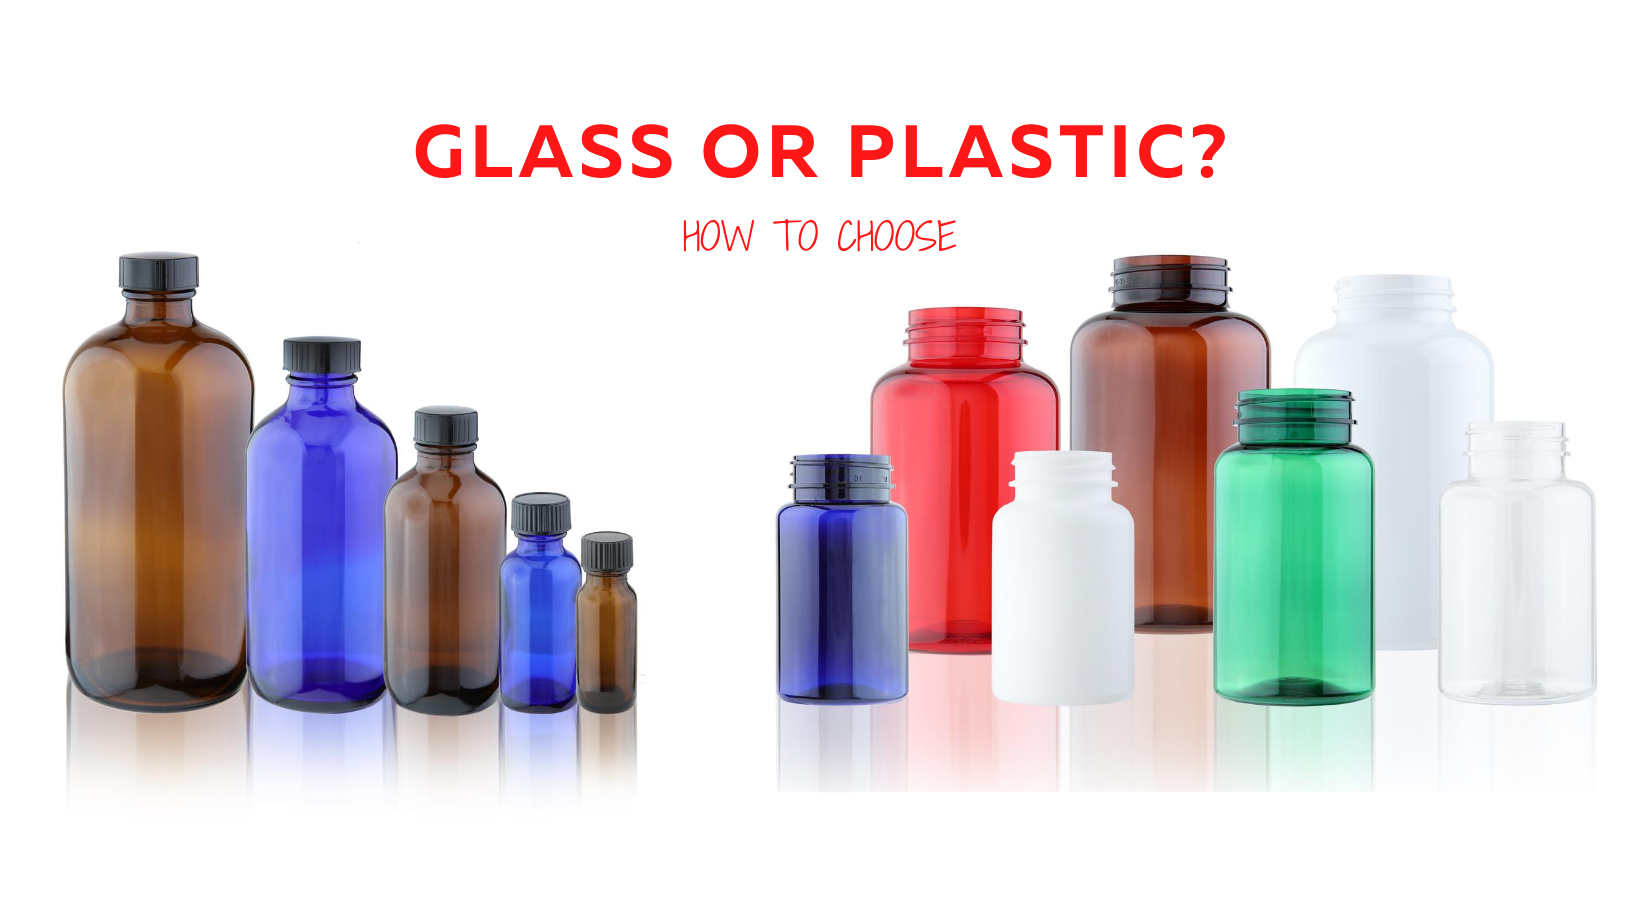 Exactly Why Are Glass Bottles or Plastic Bottles Better?